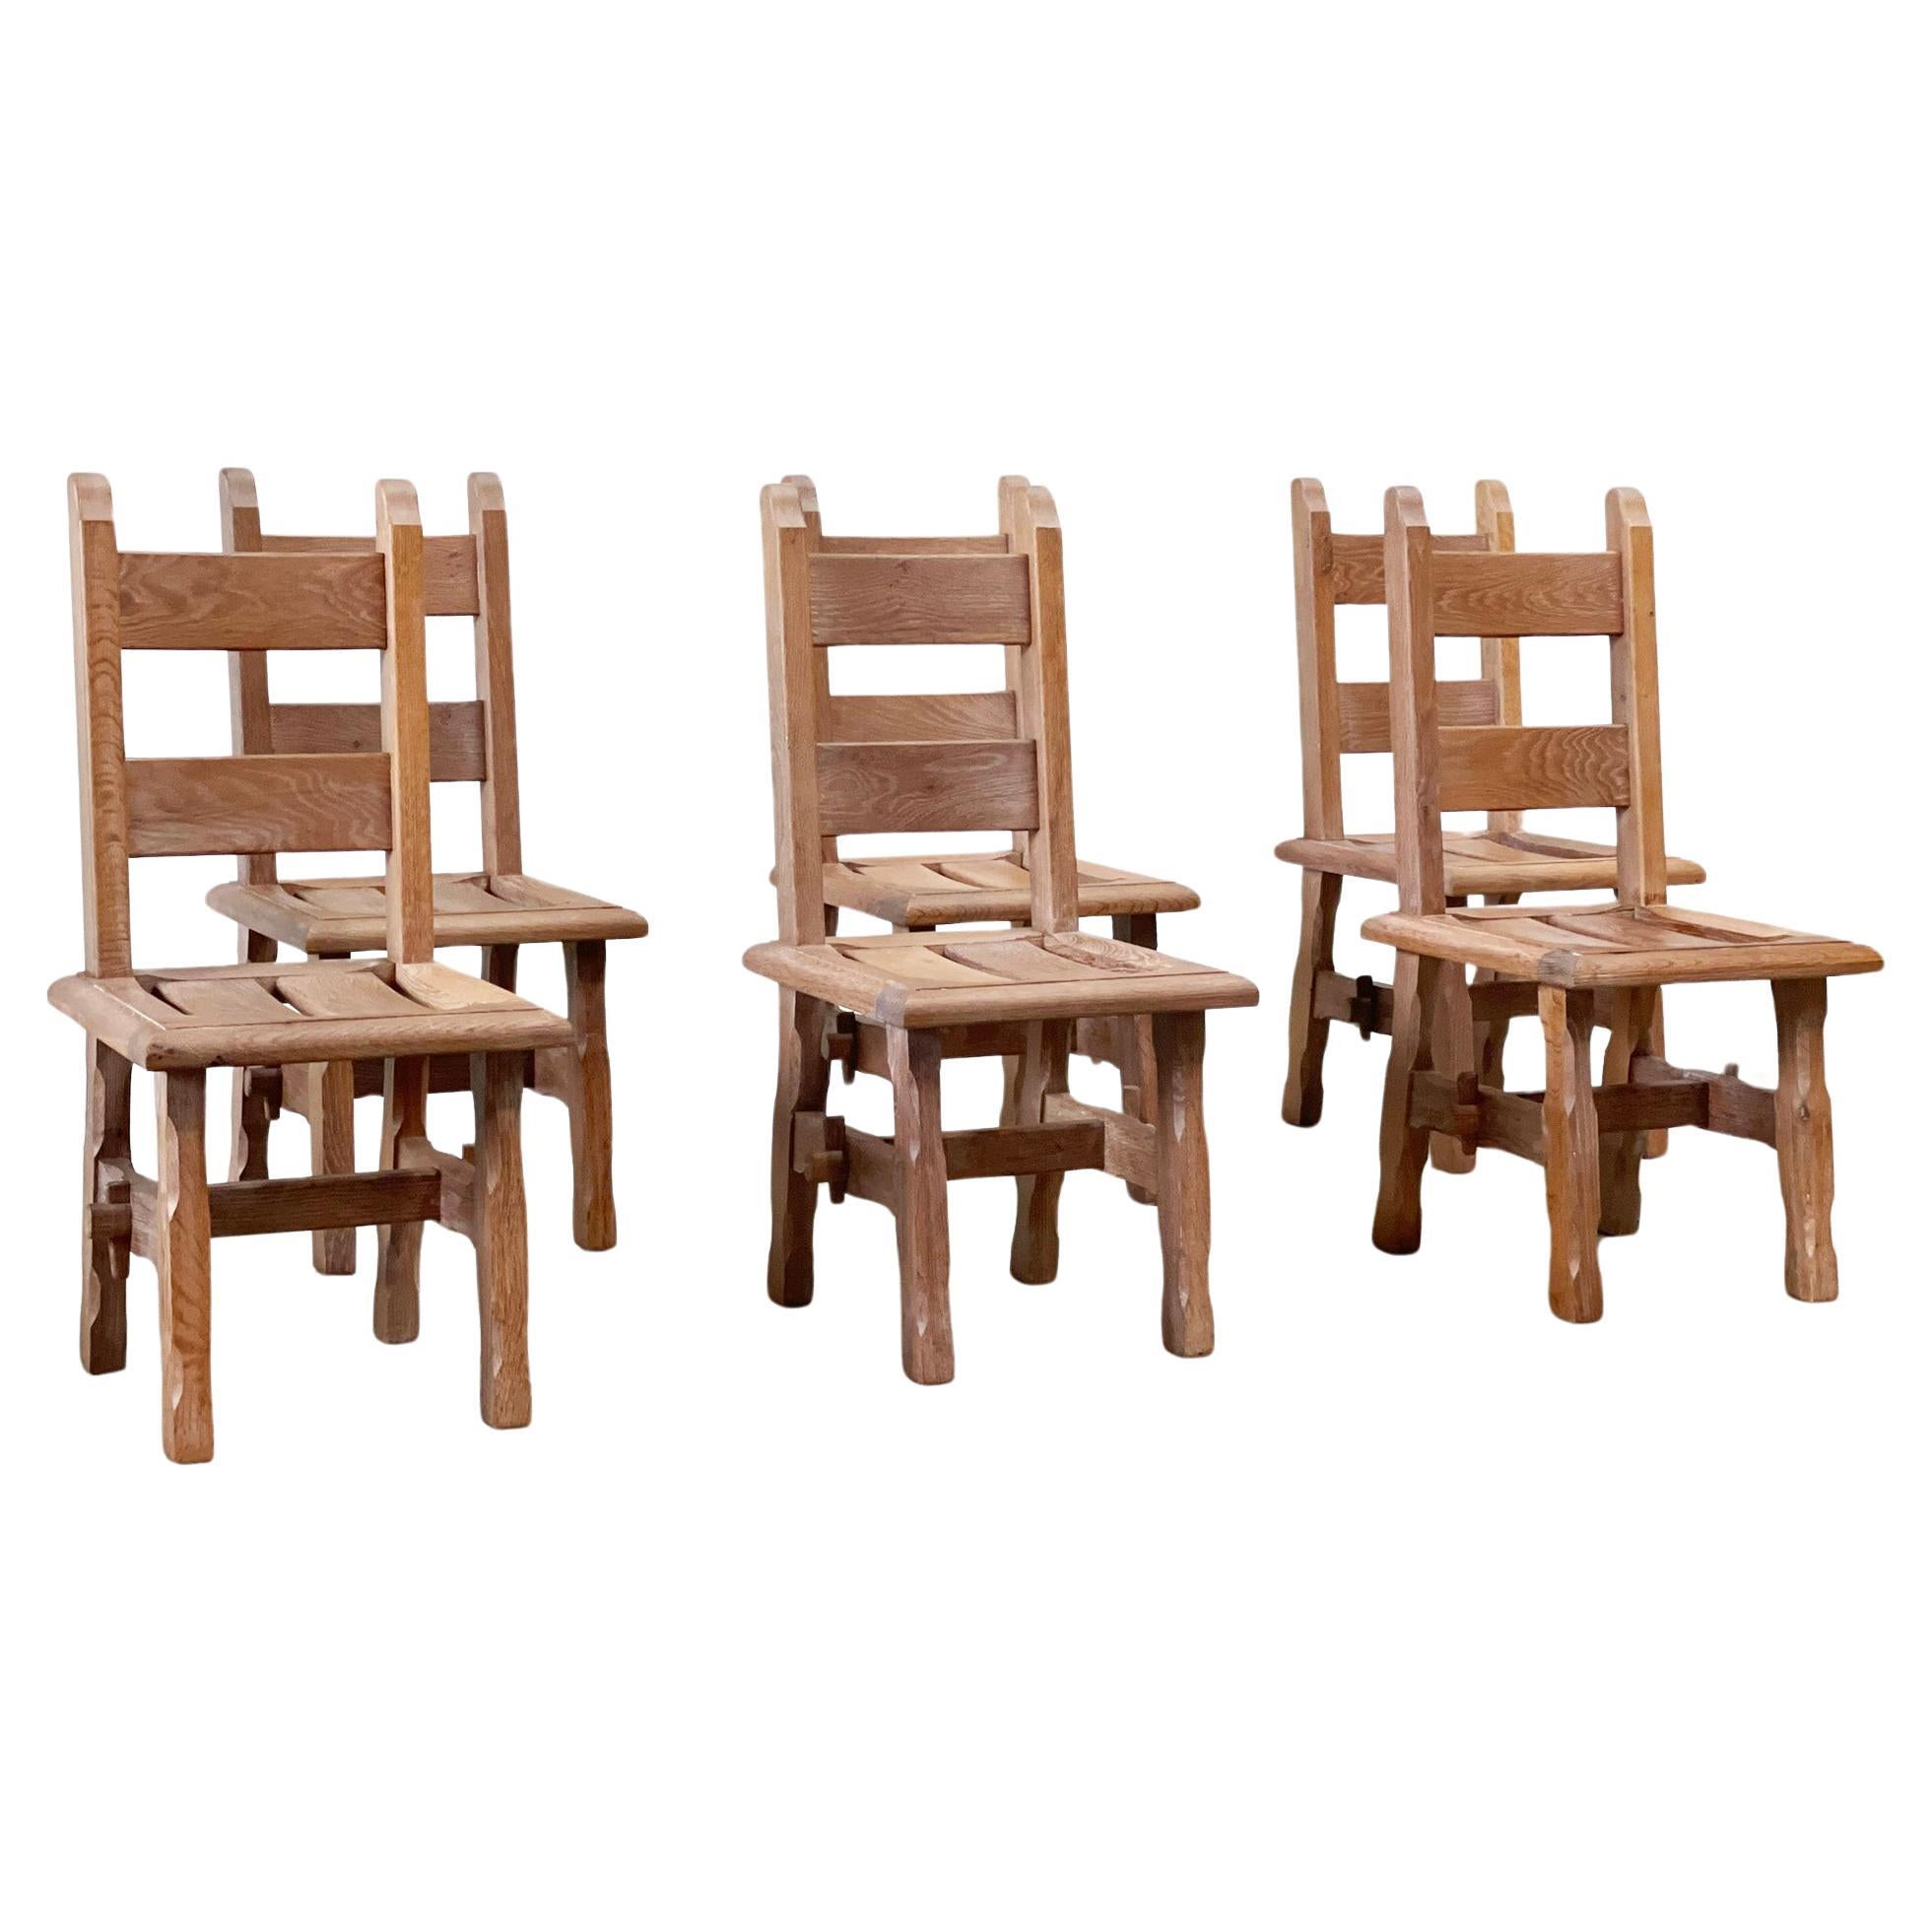 Brutalist french wooden chairs For Sale